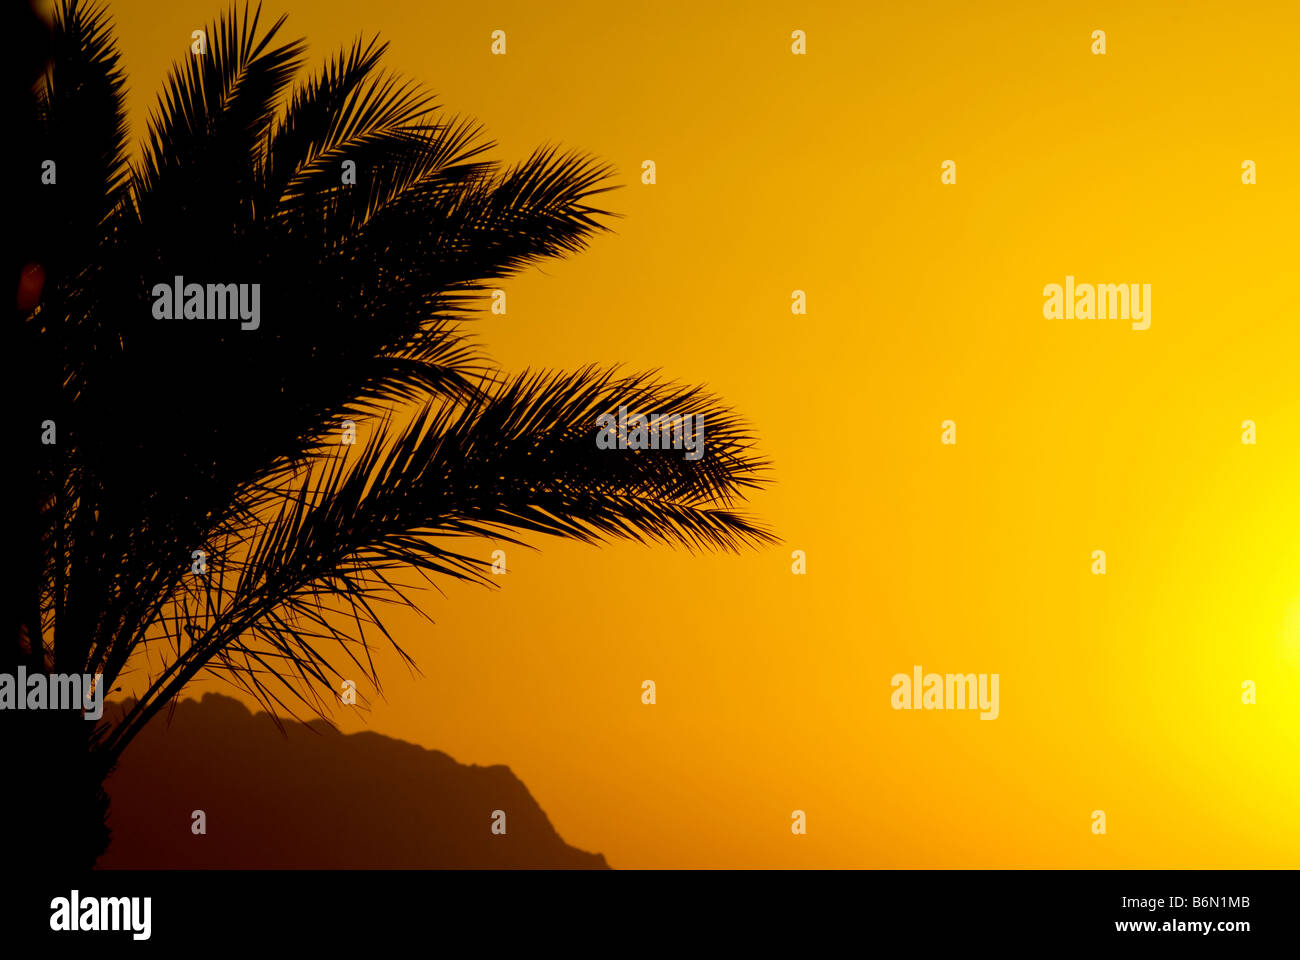 palmtree and sunset in egypt Stock Photo